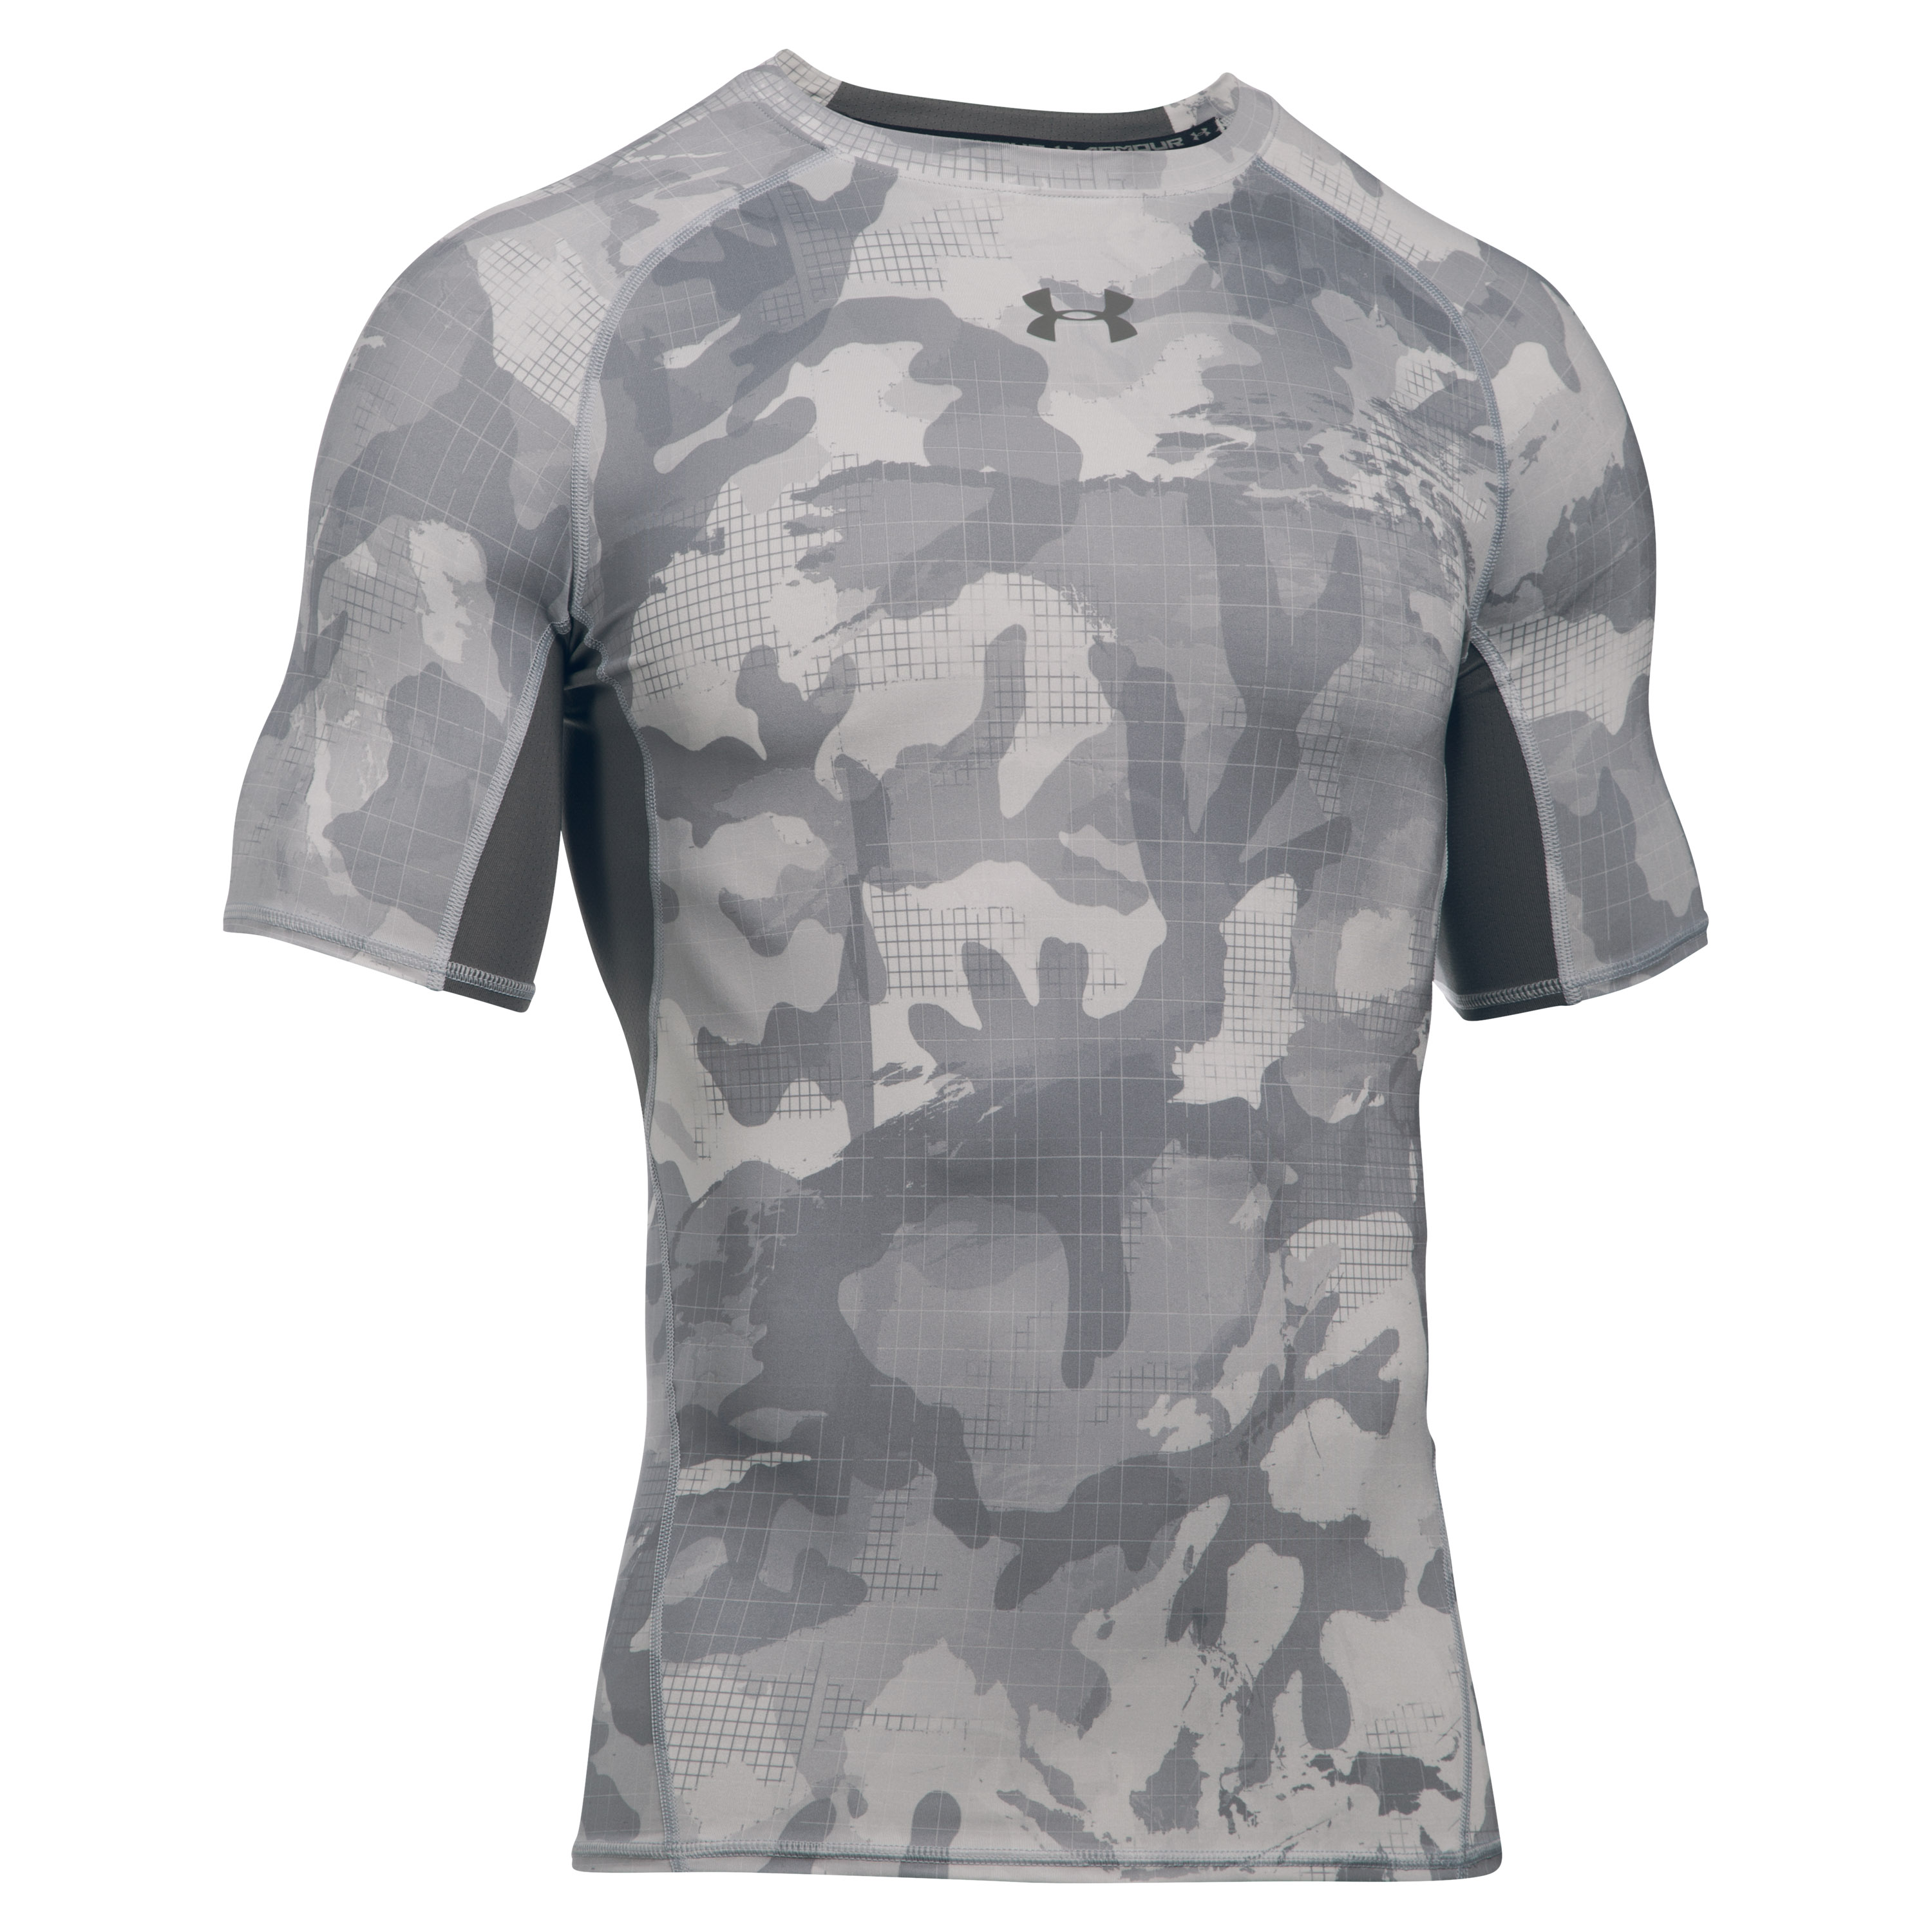 under armour camouflage